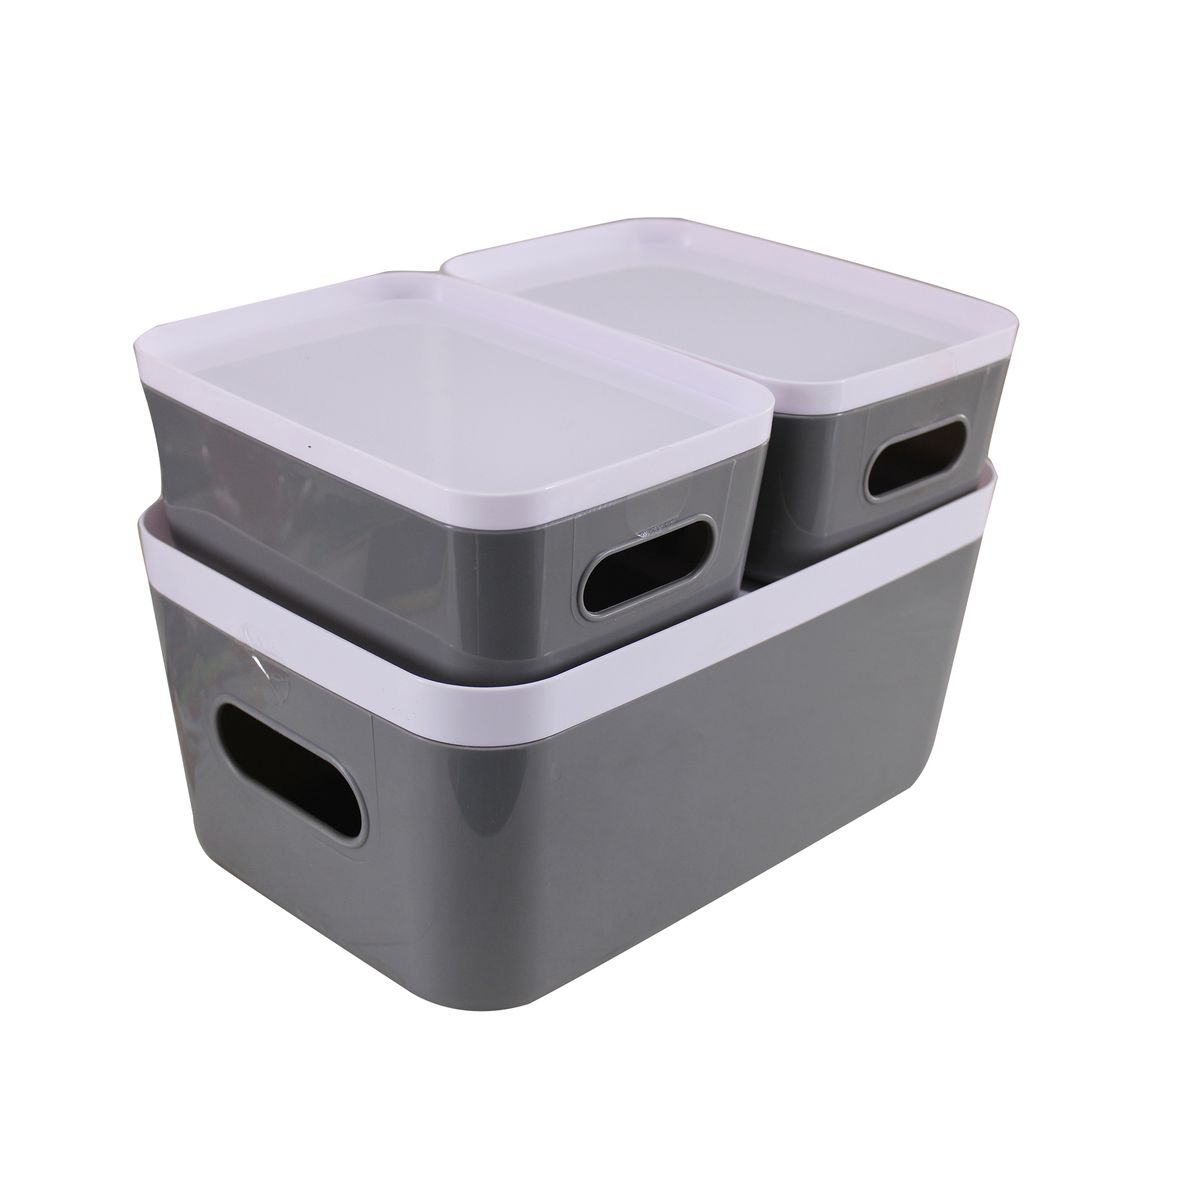 3 Piece Multifunction Bed Bath & Kitchen Stoarge Bins with Deep Dish Lids